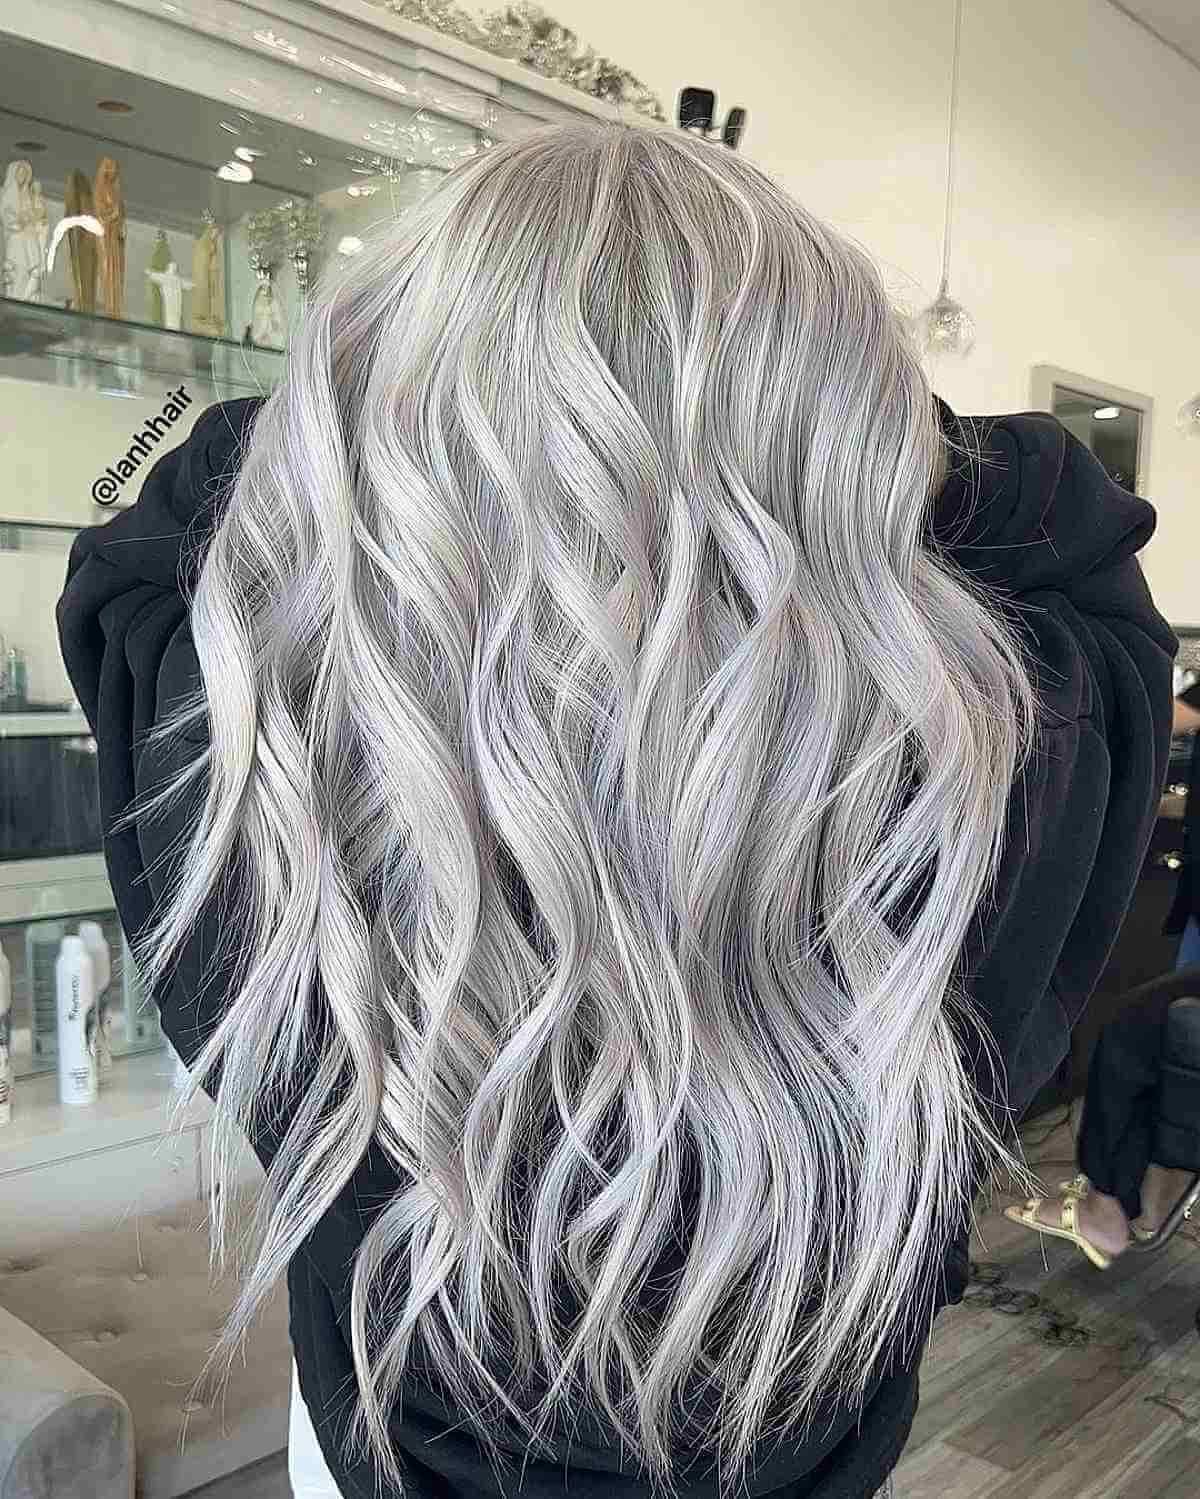 27 Ways to Get The Icy Blonde Hair Trend in 2023